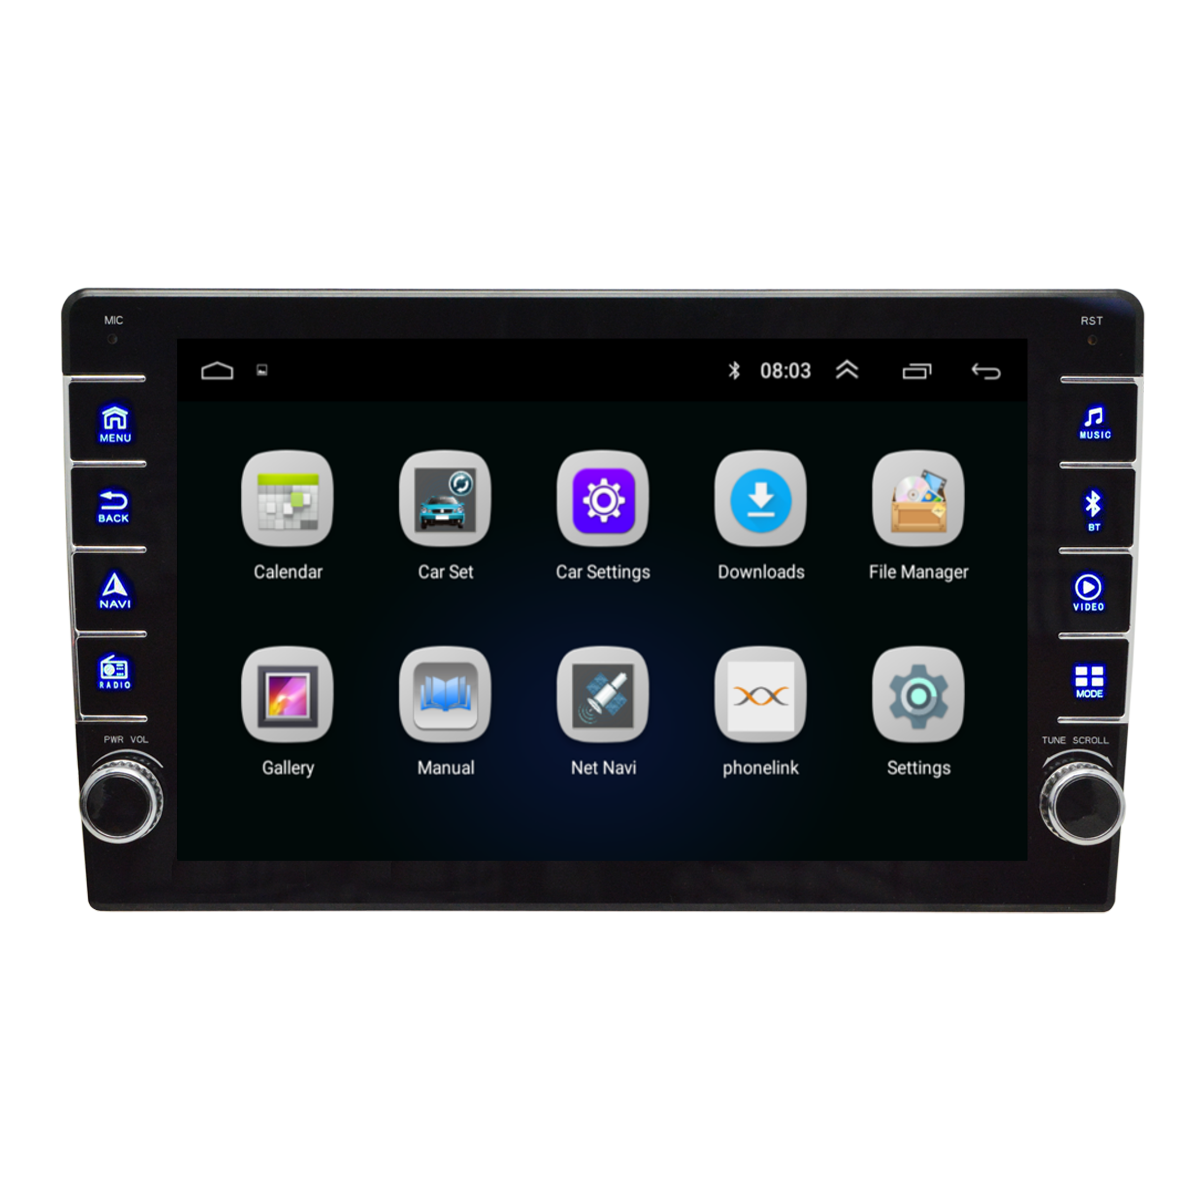 8Inch-9Inch-1Din-For-Android-81-Car-Mlitimedia-Player-Adjustable-Screen-Quad-Core-116G-WIFI-GPS-FM-S-1691537